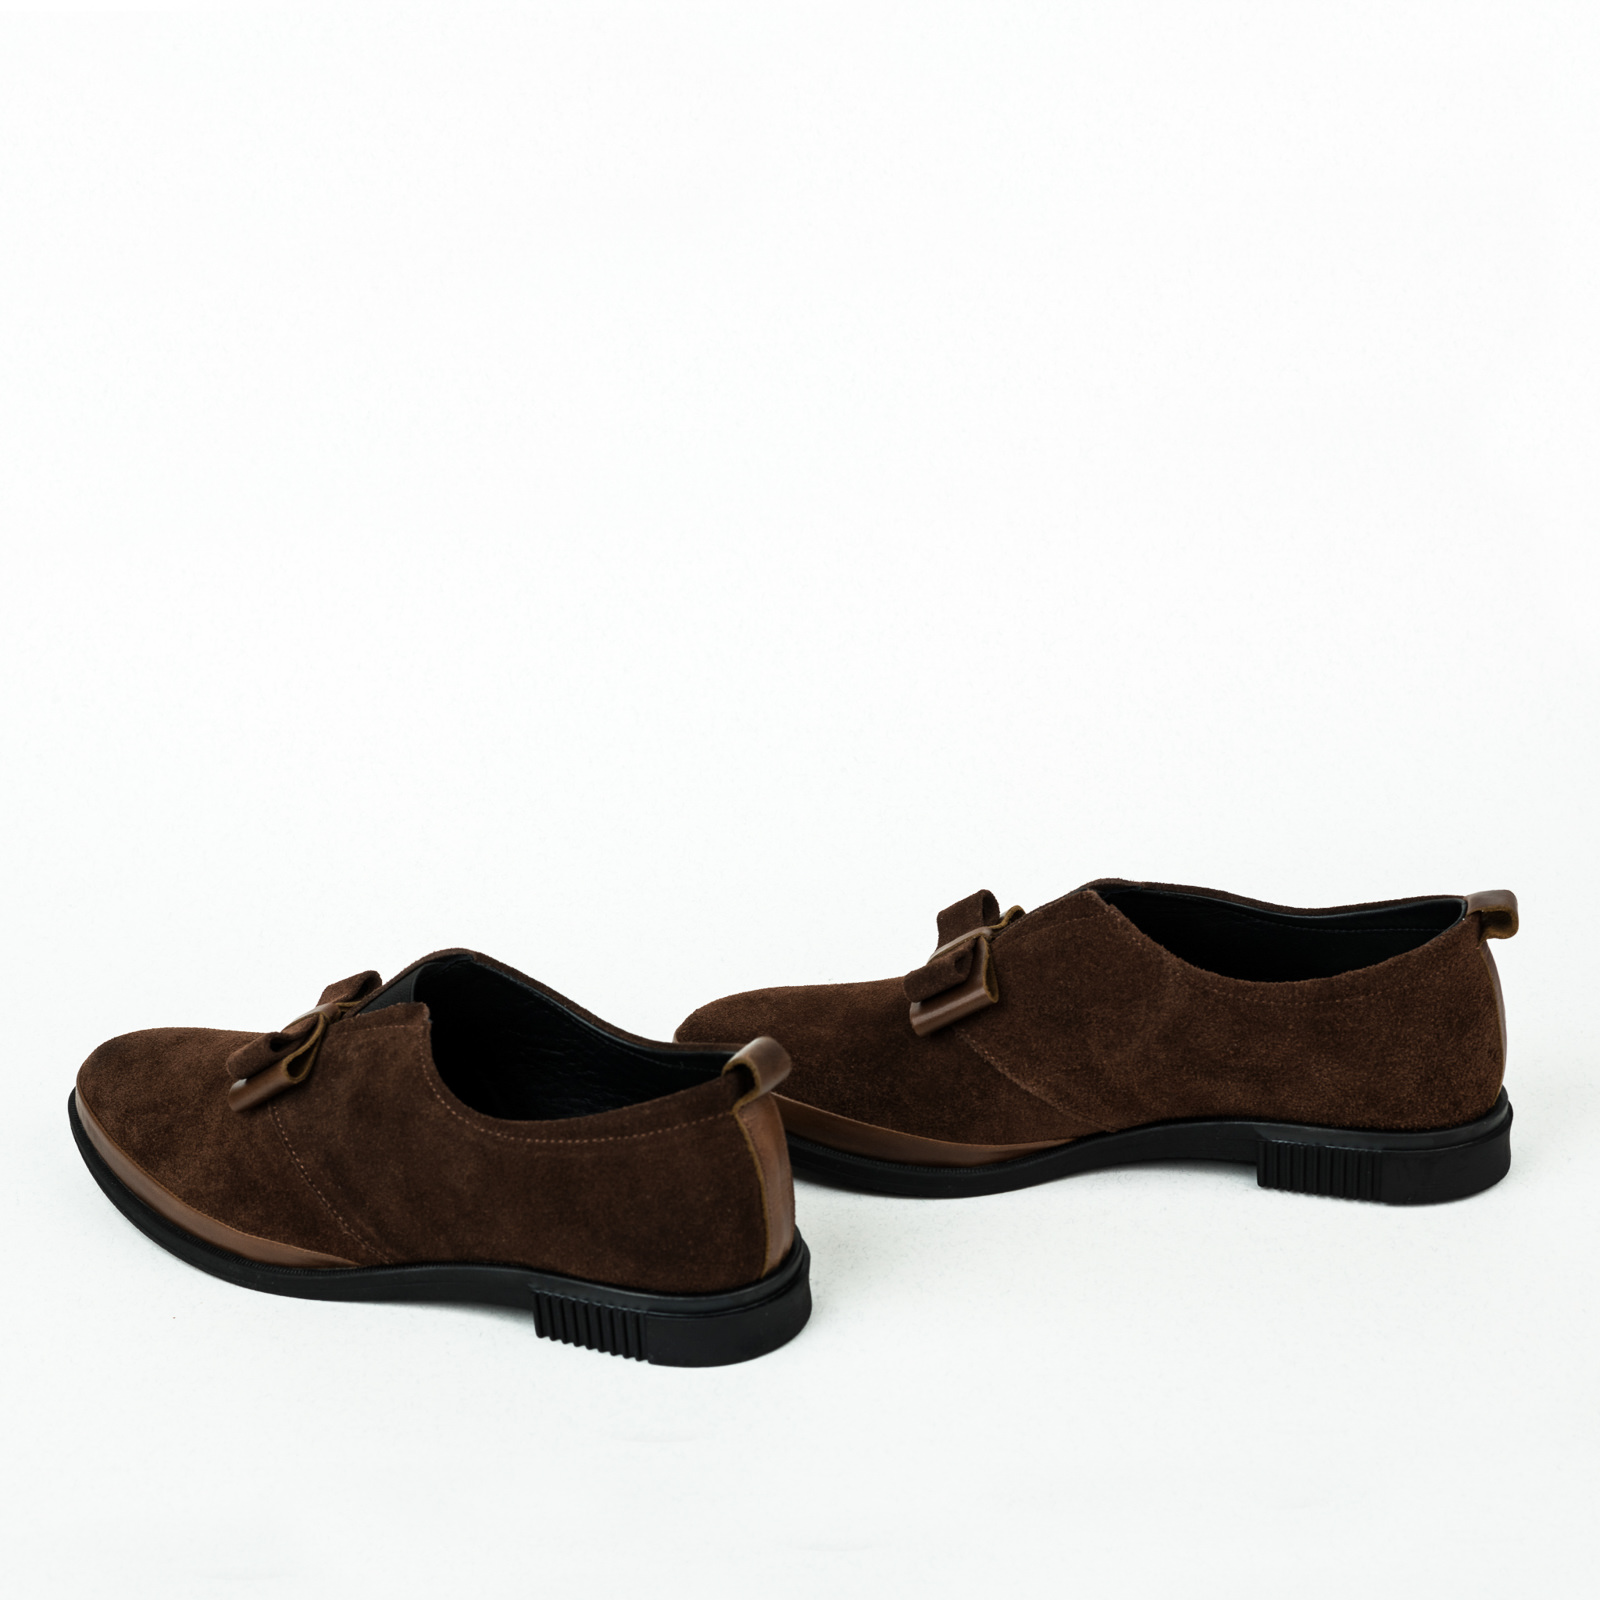 Leather shoes & flats B016 - BROWN